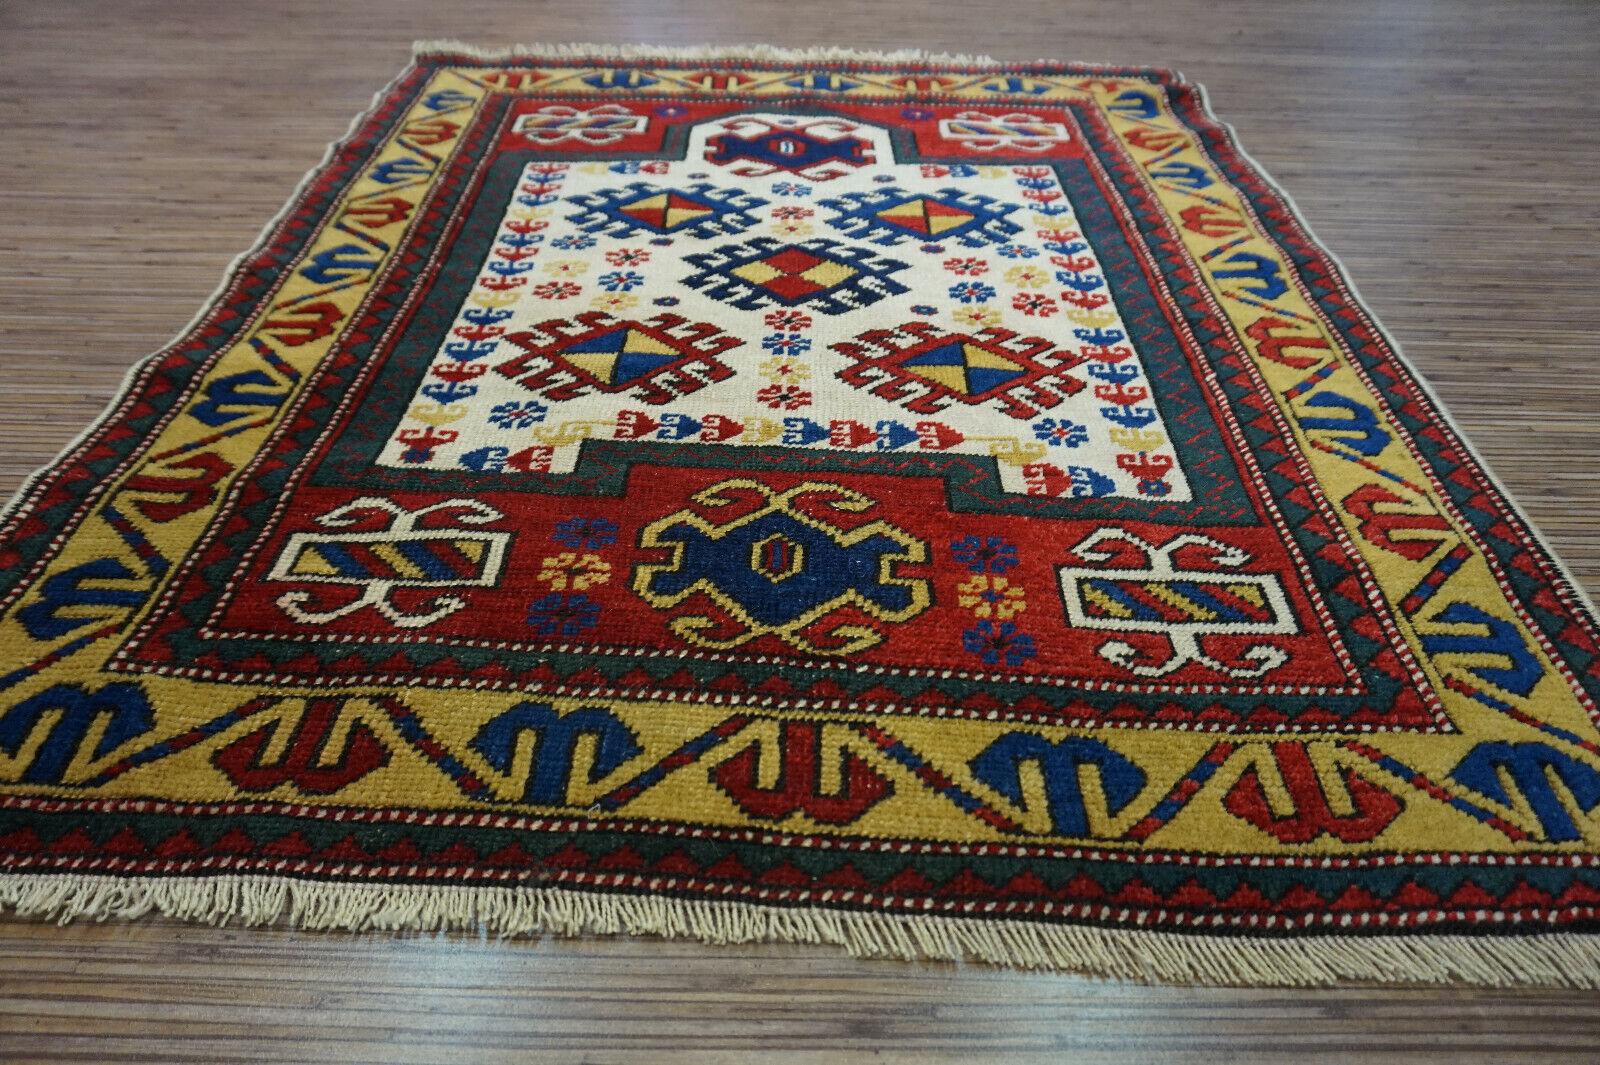 Introduce a touch of timeless elegance to your space with this Handmade Antique Caucasian Kazak Prayer Rug. Crafted in the 1940s, this exquisite piece measures 2.9’ x 3.6’ (90cm x 112cm), making it a versatile addition to any room. The rug is in